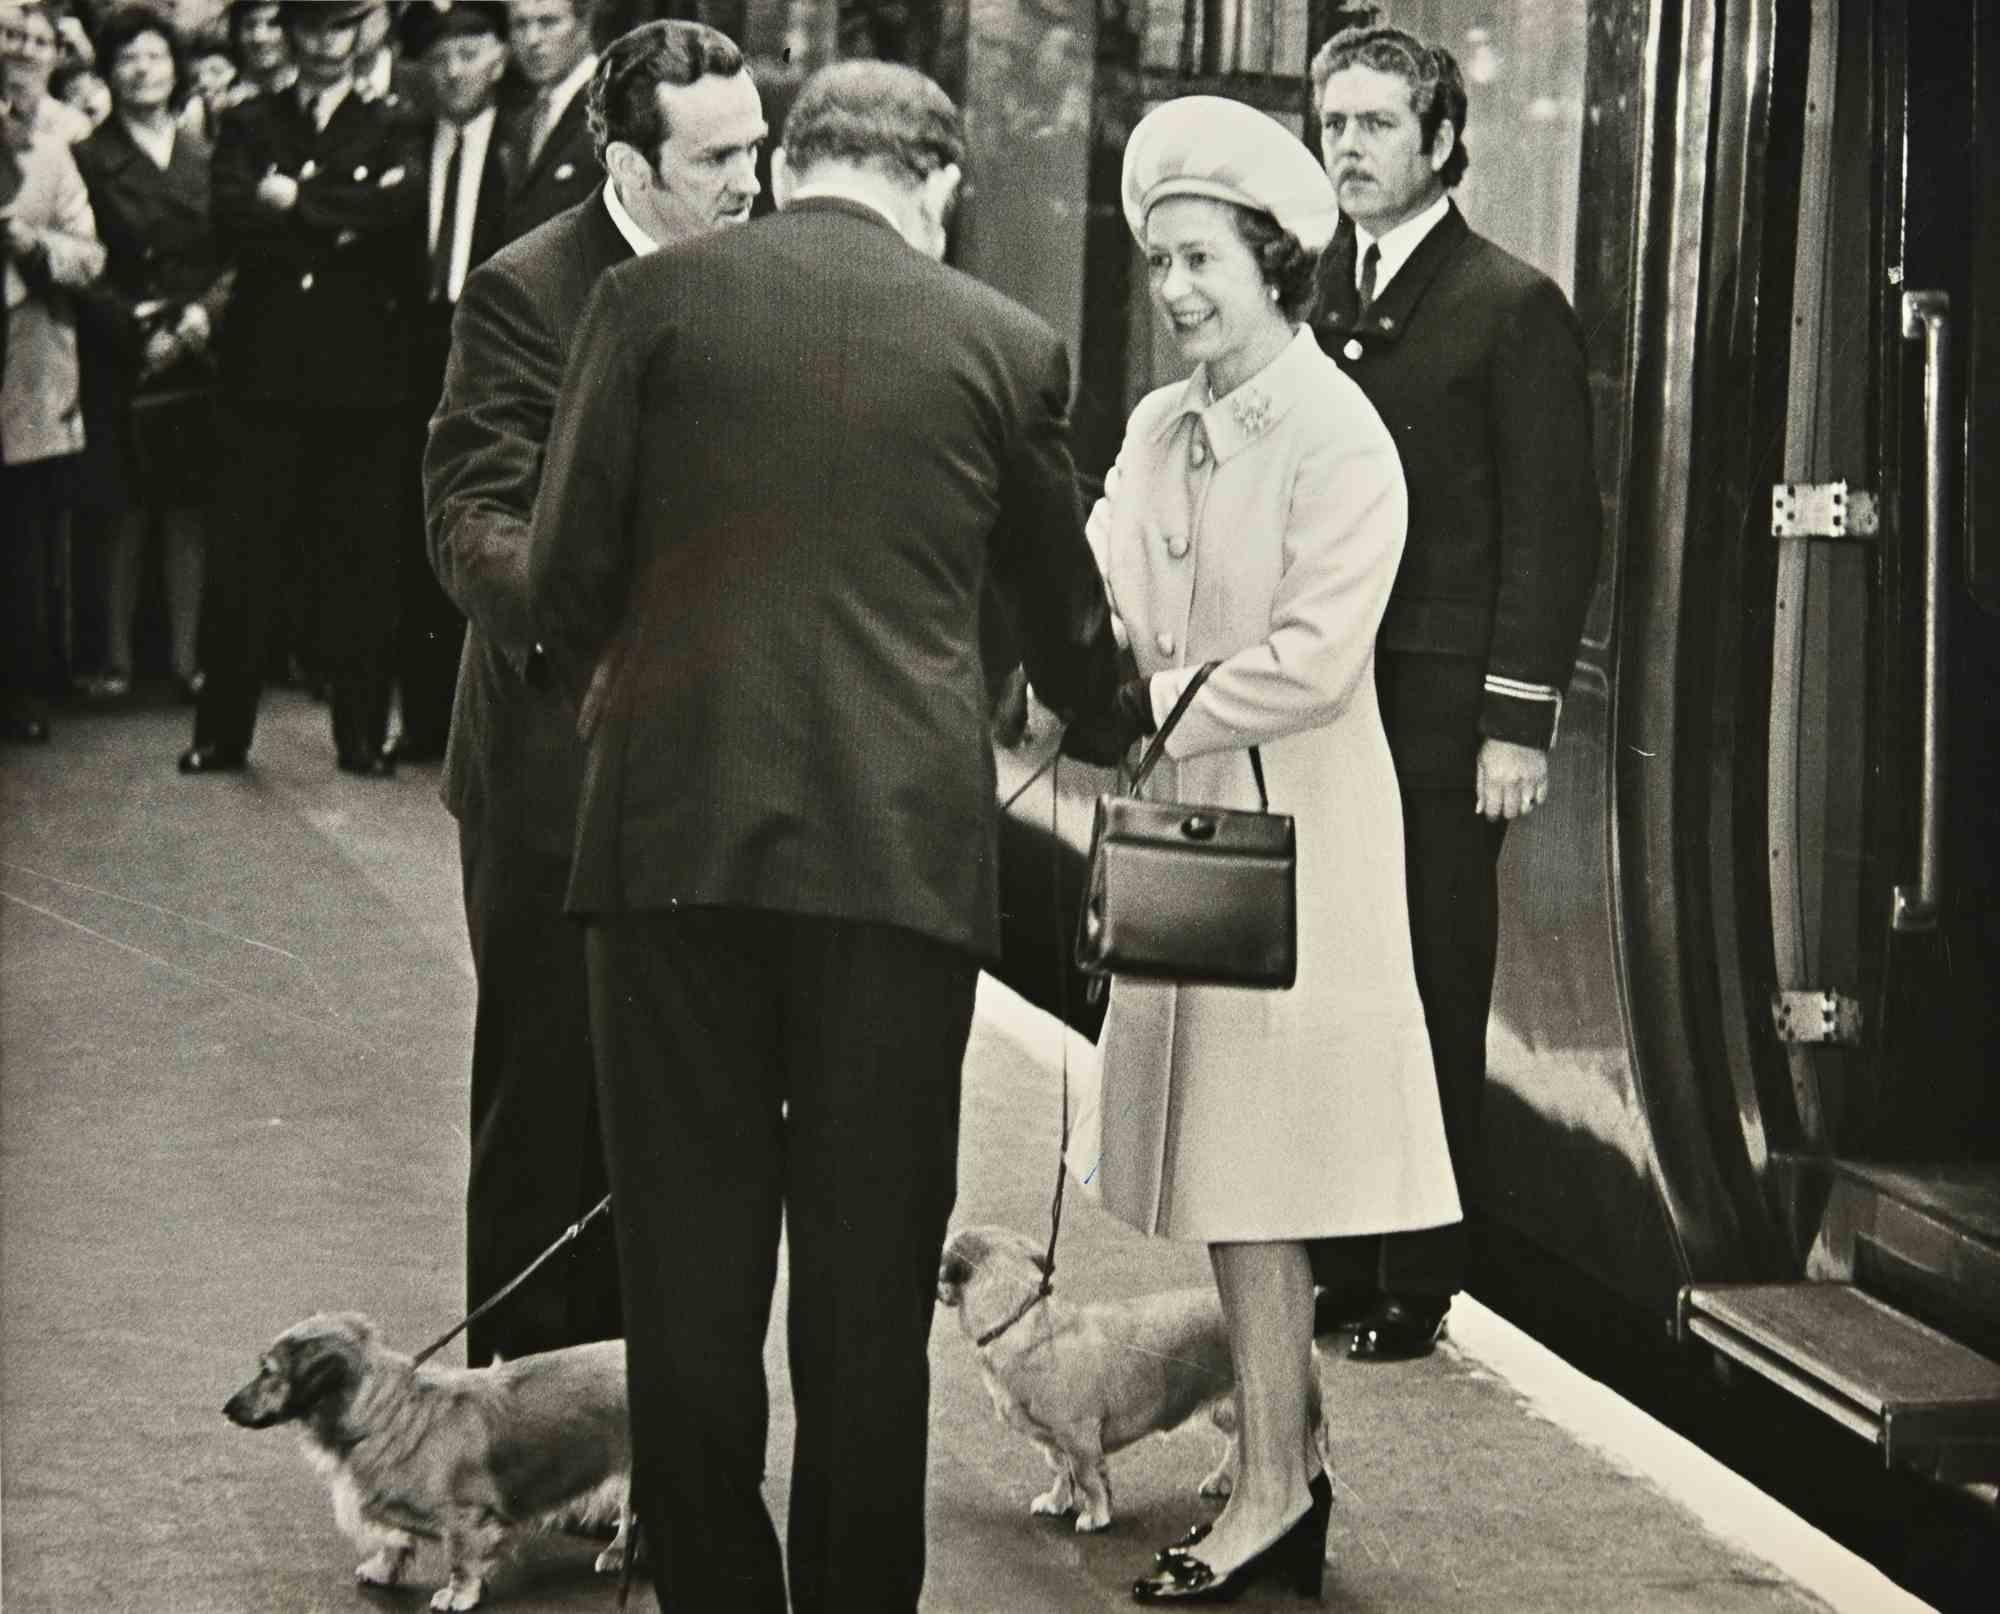 Unknown Figurative Photograph - Queen Elizabeth with Dogs - Photograph - 1960s